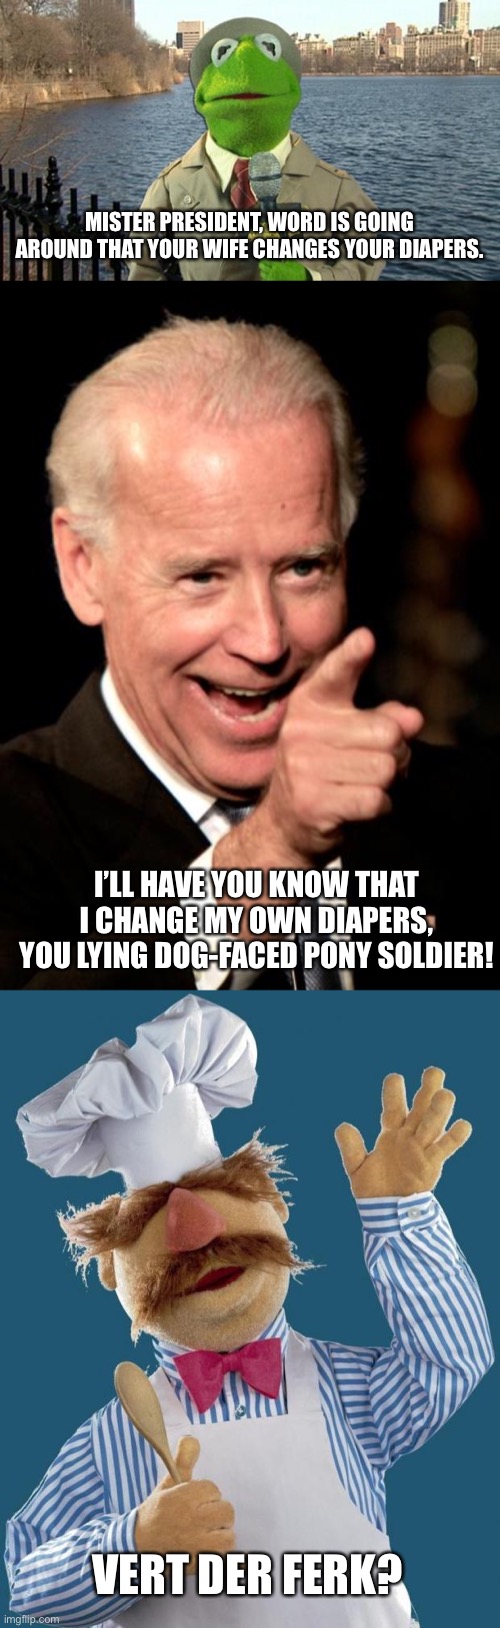 Poor Dementia Joe | MISTER PRESIDENT, WORD IS GOING AROUND THAT YOUR WIFE CHANGES YOUR DIAPERS. I’LL HAVE YOU KNOW THAT I CHANGE MY OWN DIAPERS, YOU LYING DOG-FACED PONY SOLDIER! VERT DER FERK? | image tagged in kermit news report,memes,smilin biden,swedish chef | made w/ Imgflip meme maker